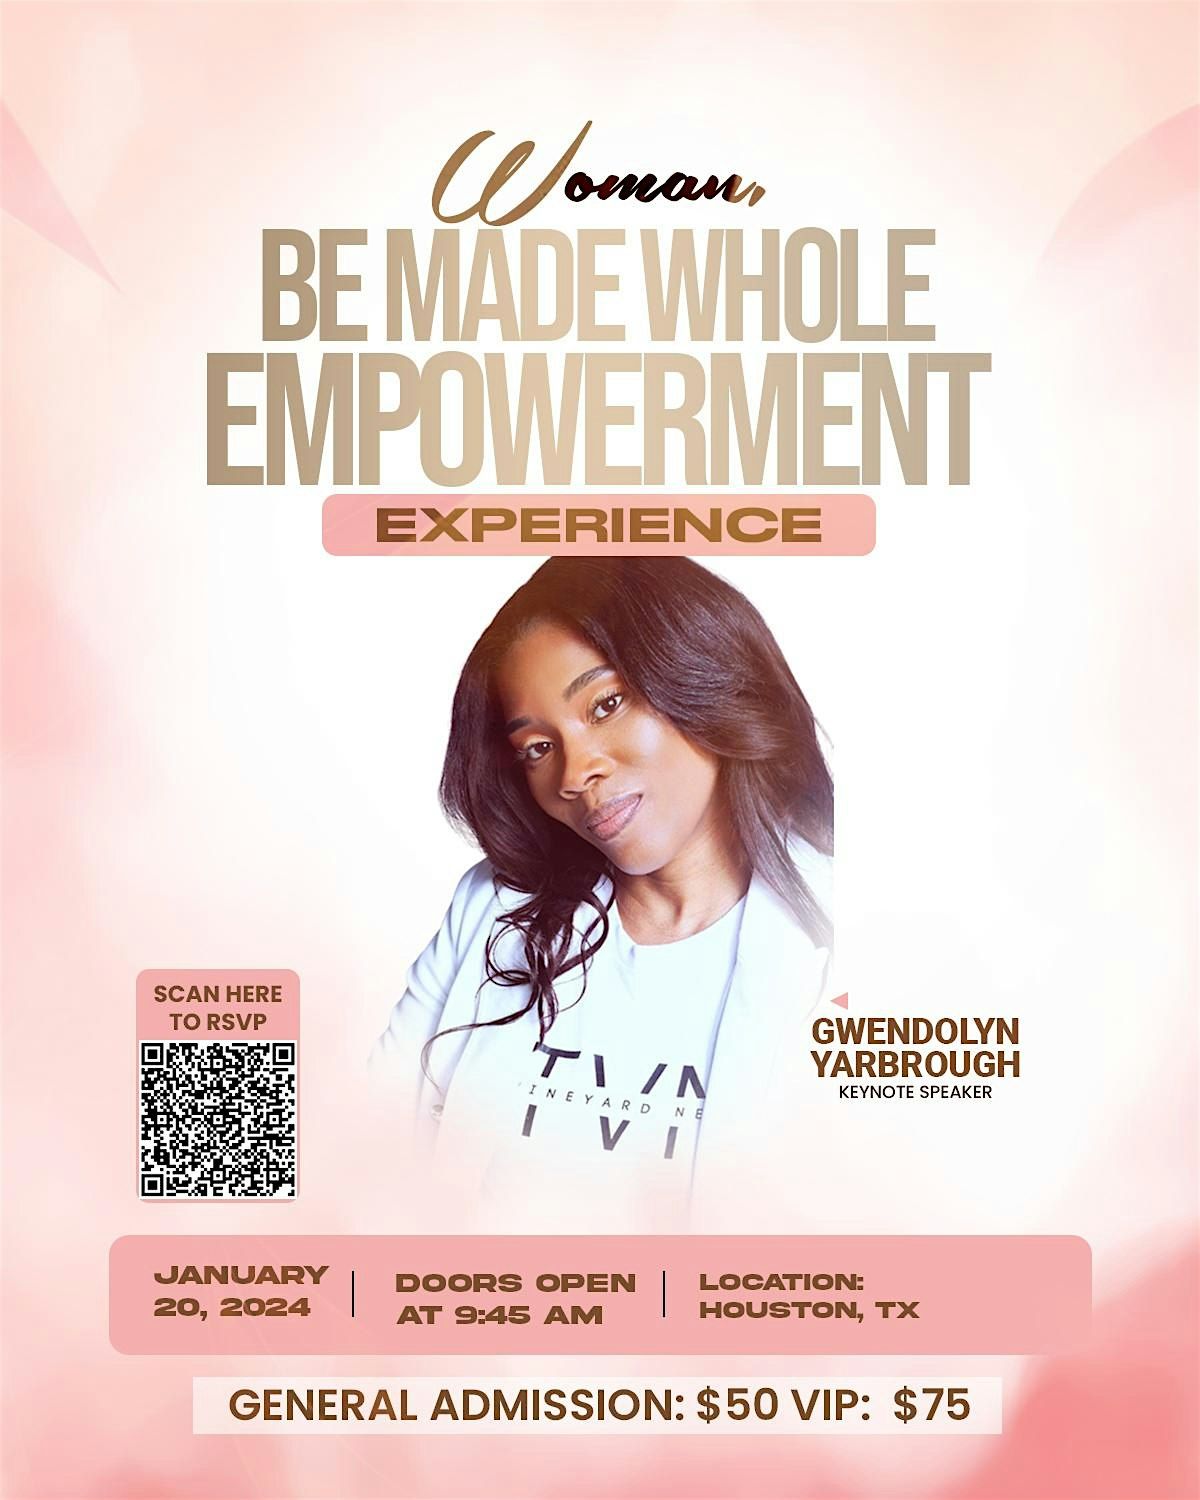 Be Made Whole Empowerment Experience